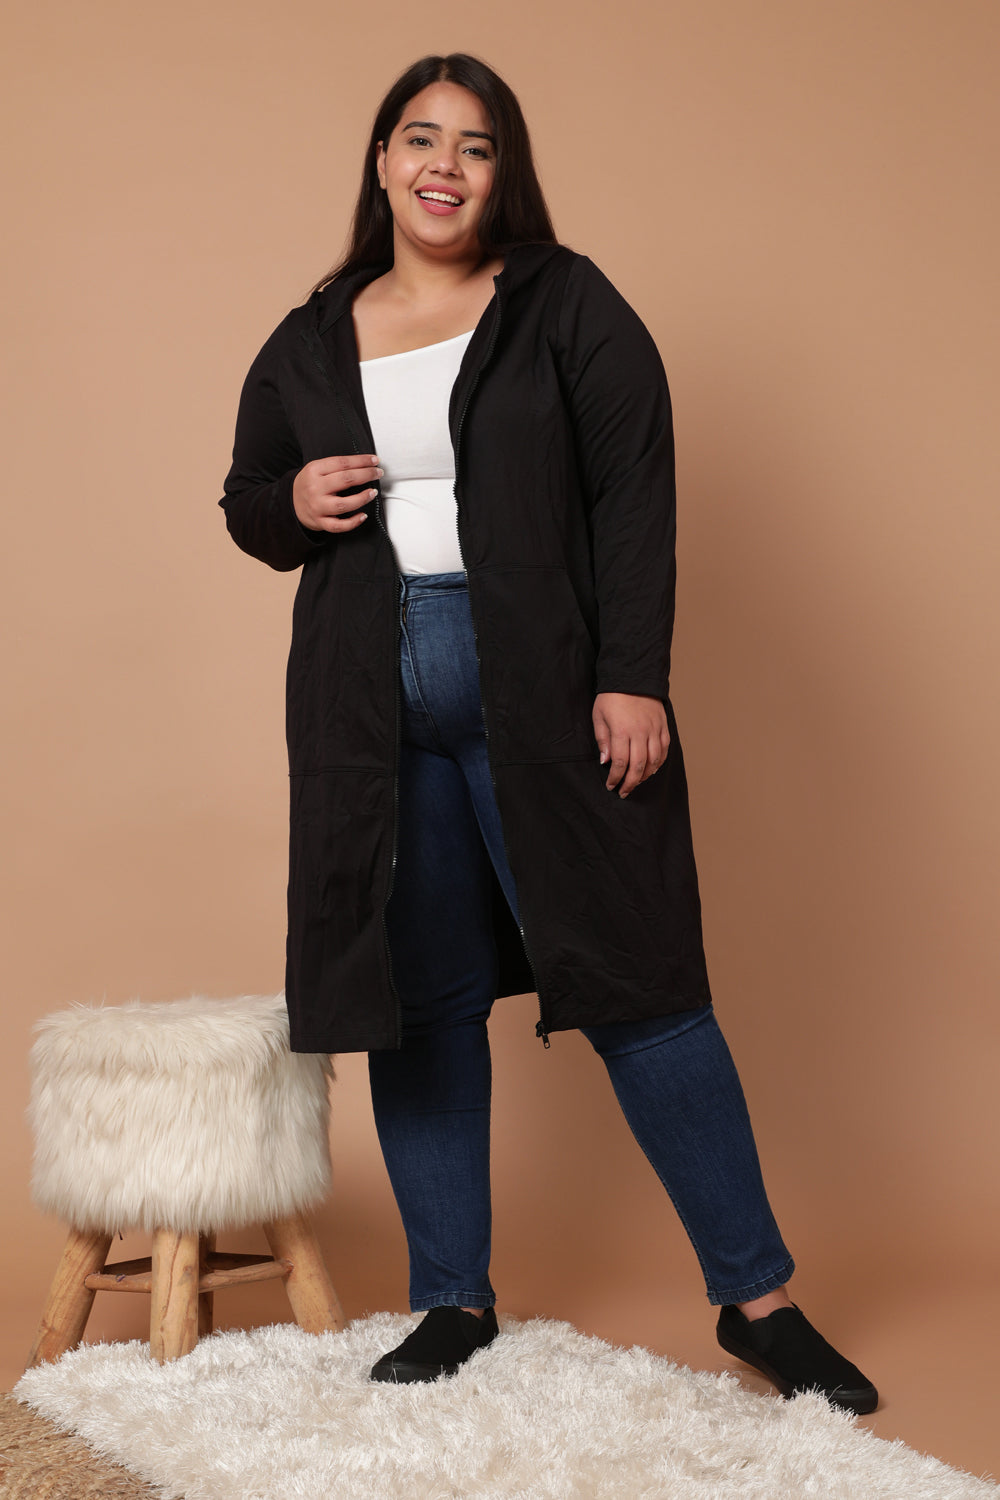 Plus Size Outfits - Buy Plus Size Clothing for Women Online in India